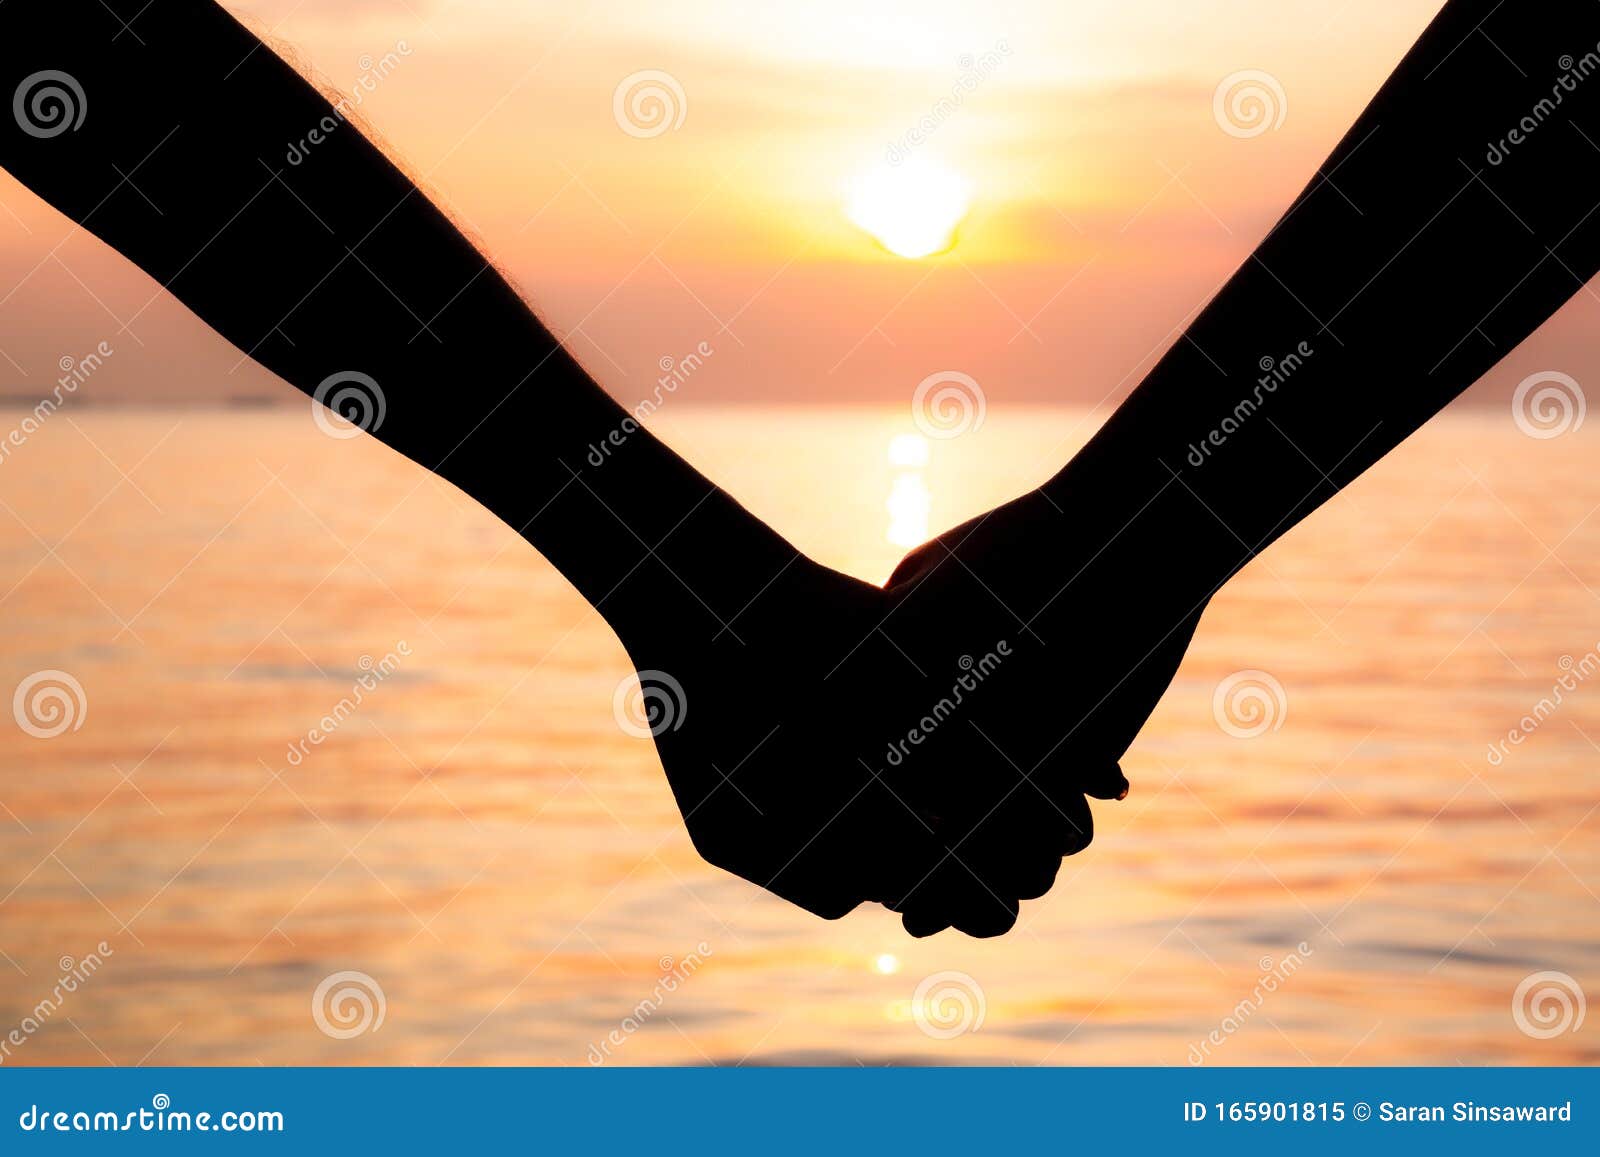 12 917 Couple Holding Hands Sunset Photos Free Royalty Free Stock Photos From Dreamstime